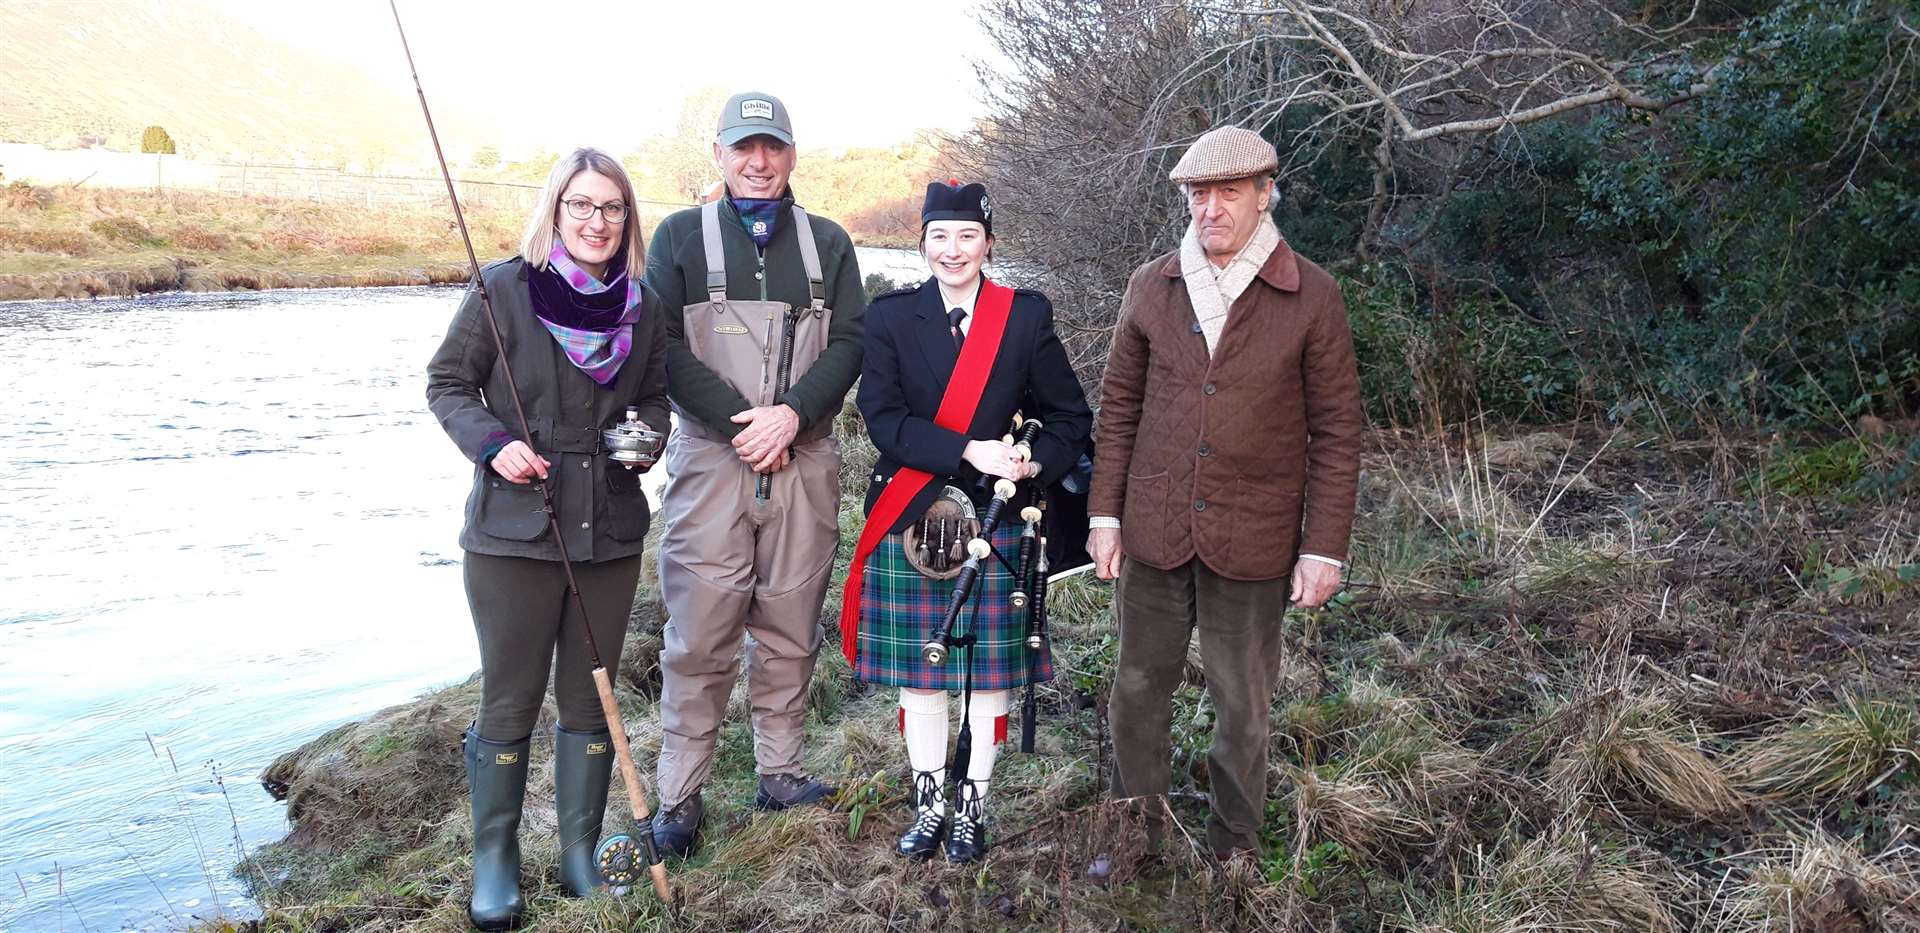 The first cast for the 2022 season was made by Yvonne Grant (left), who is standing next to her dad and ghillie Andy Stherland (Torrish). Also in the picture are piper April Sutherland and Michael Wigan.